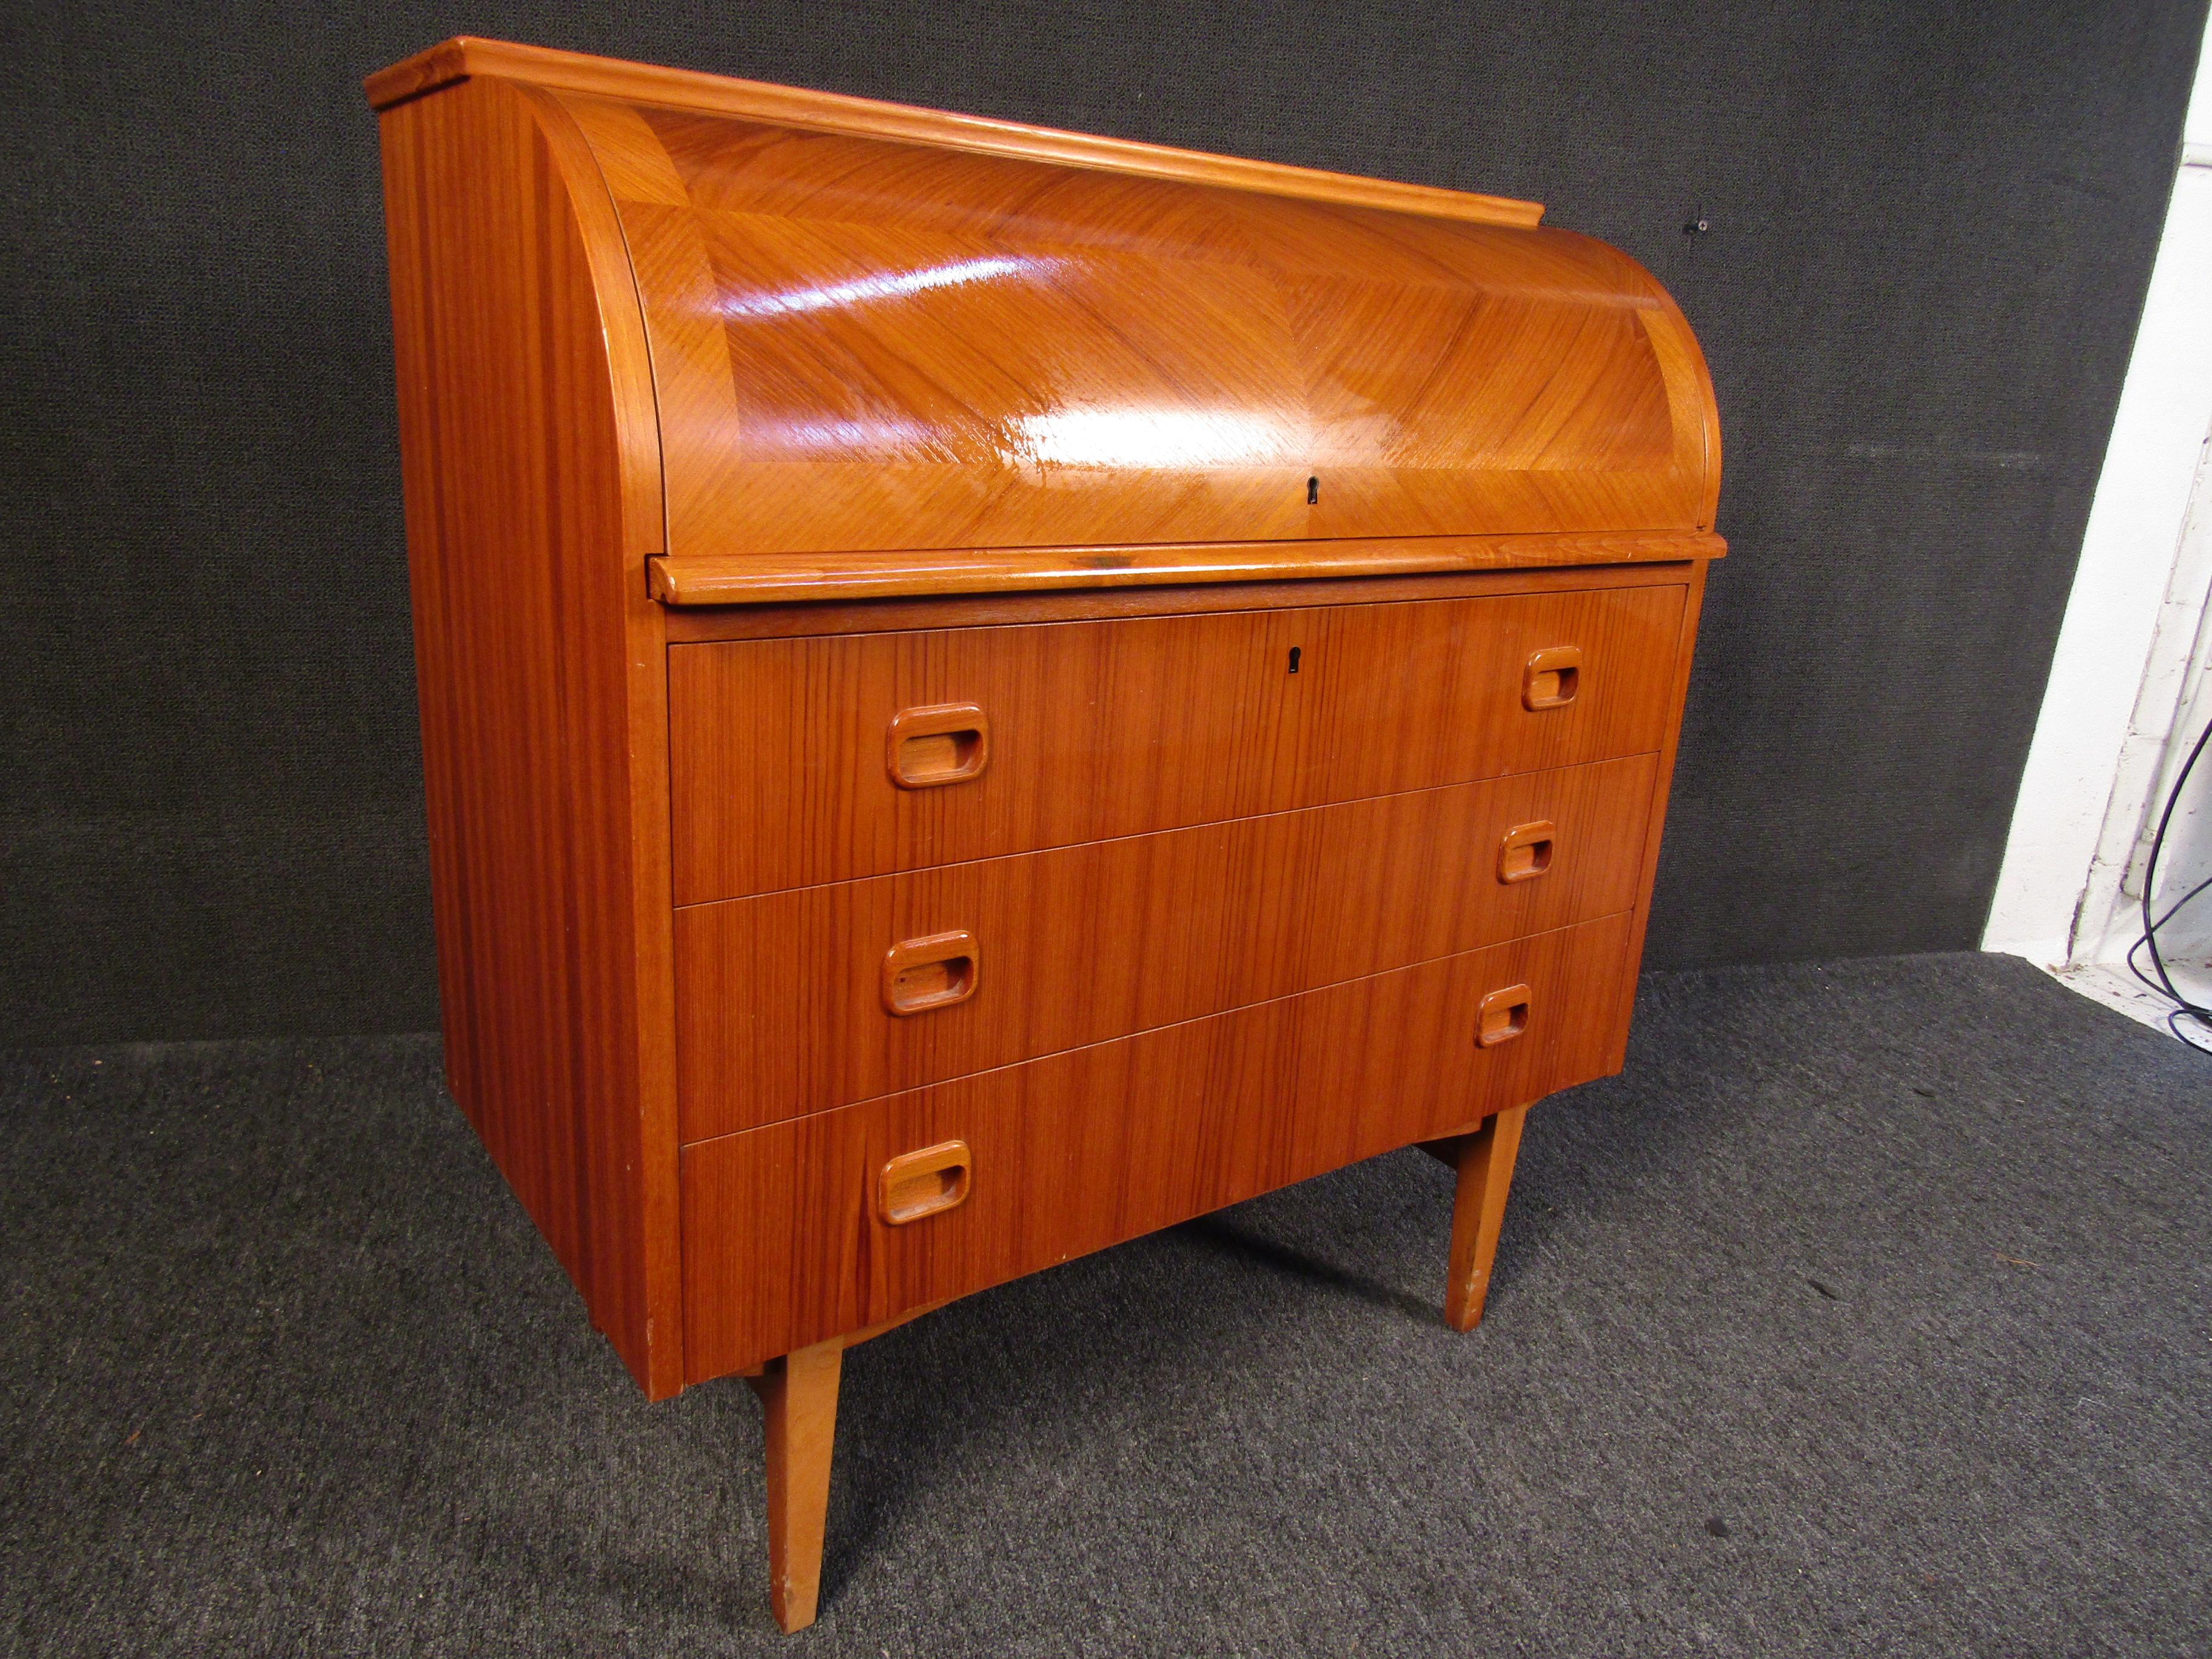 A sturdy mid-century piece that can be used as a desk or dresser, with plenty of storage for organization. Gorgeous teak woodgrain and tapered legs make for a stunning design full of style and functionality. Please confirm item location with seller